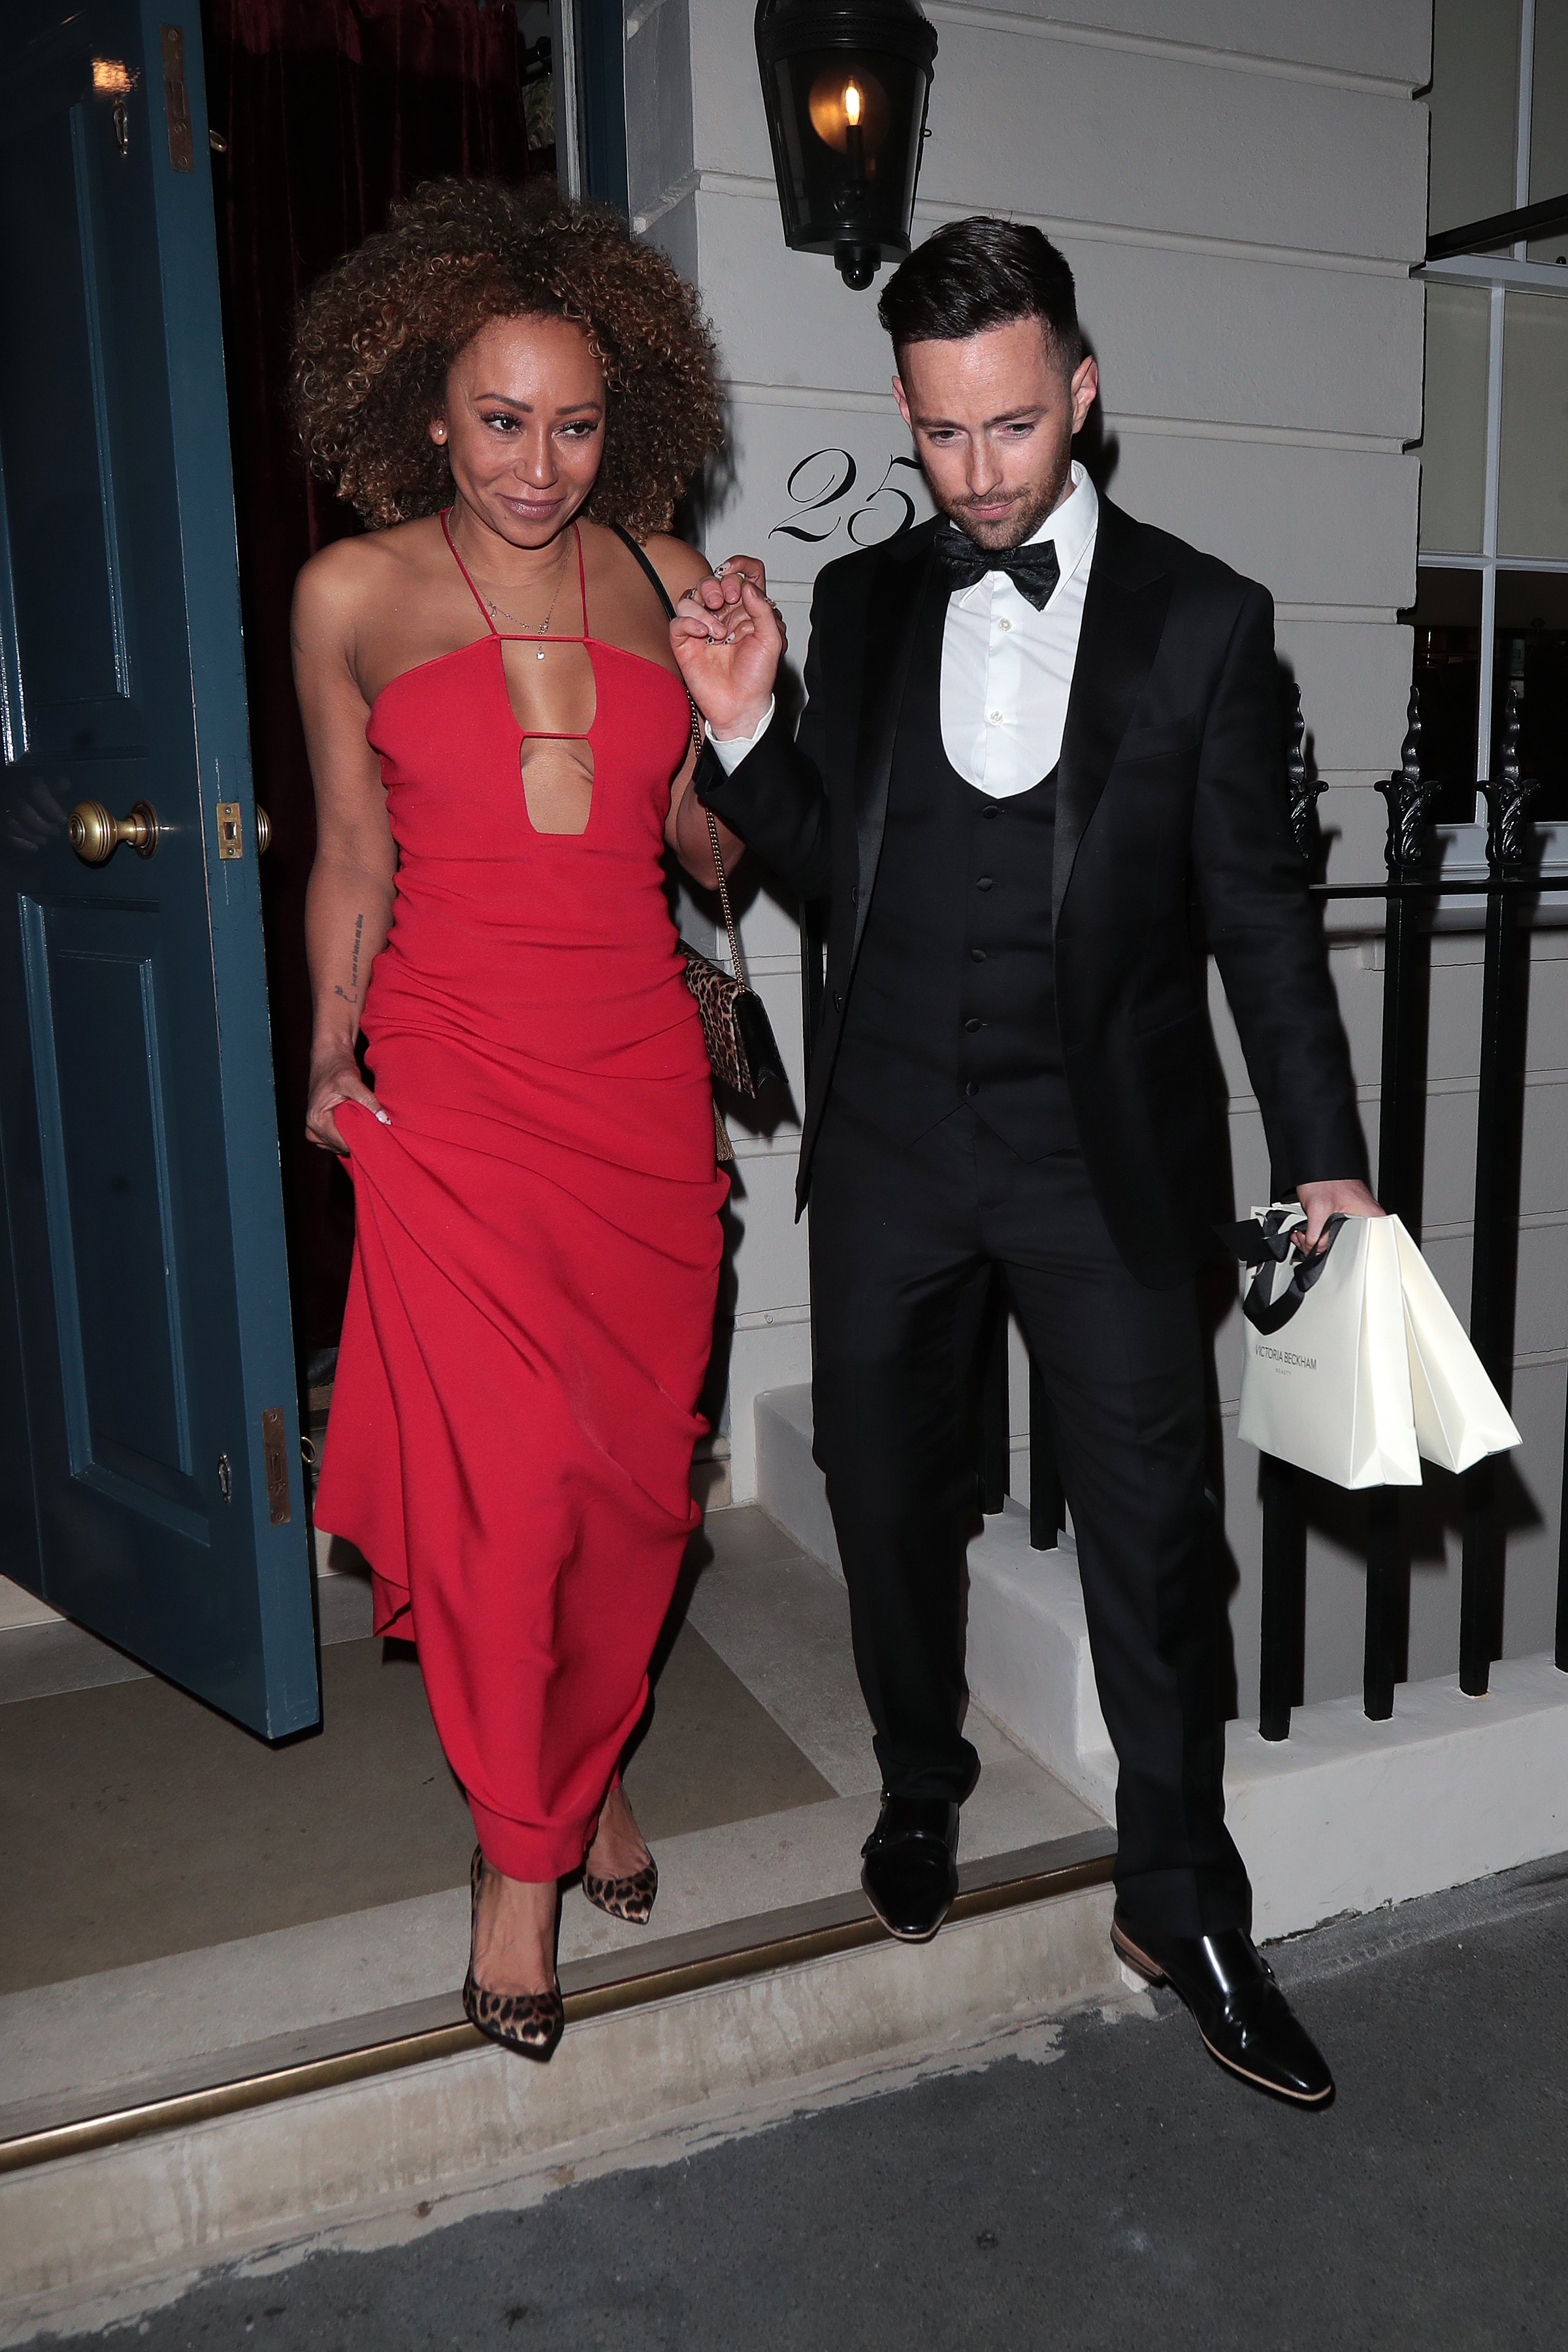 Mel leaves the party in the small hours with new partner Rory Mcphee